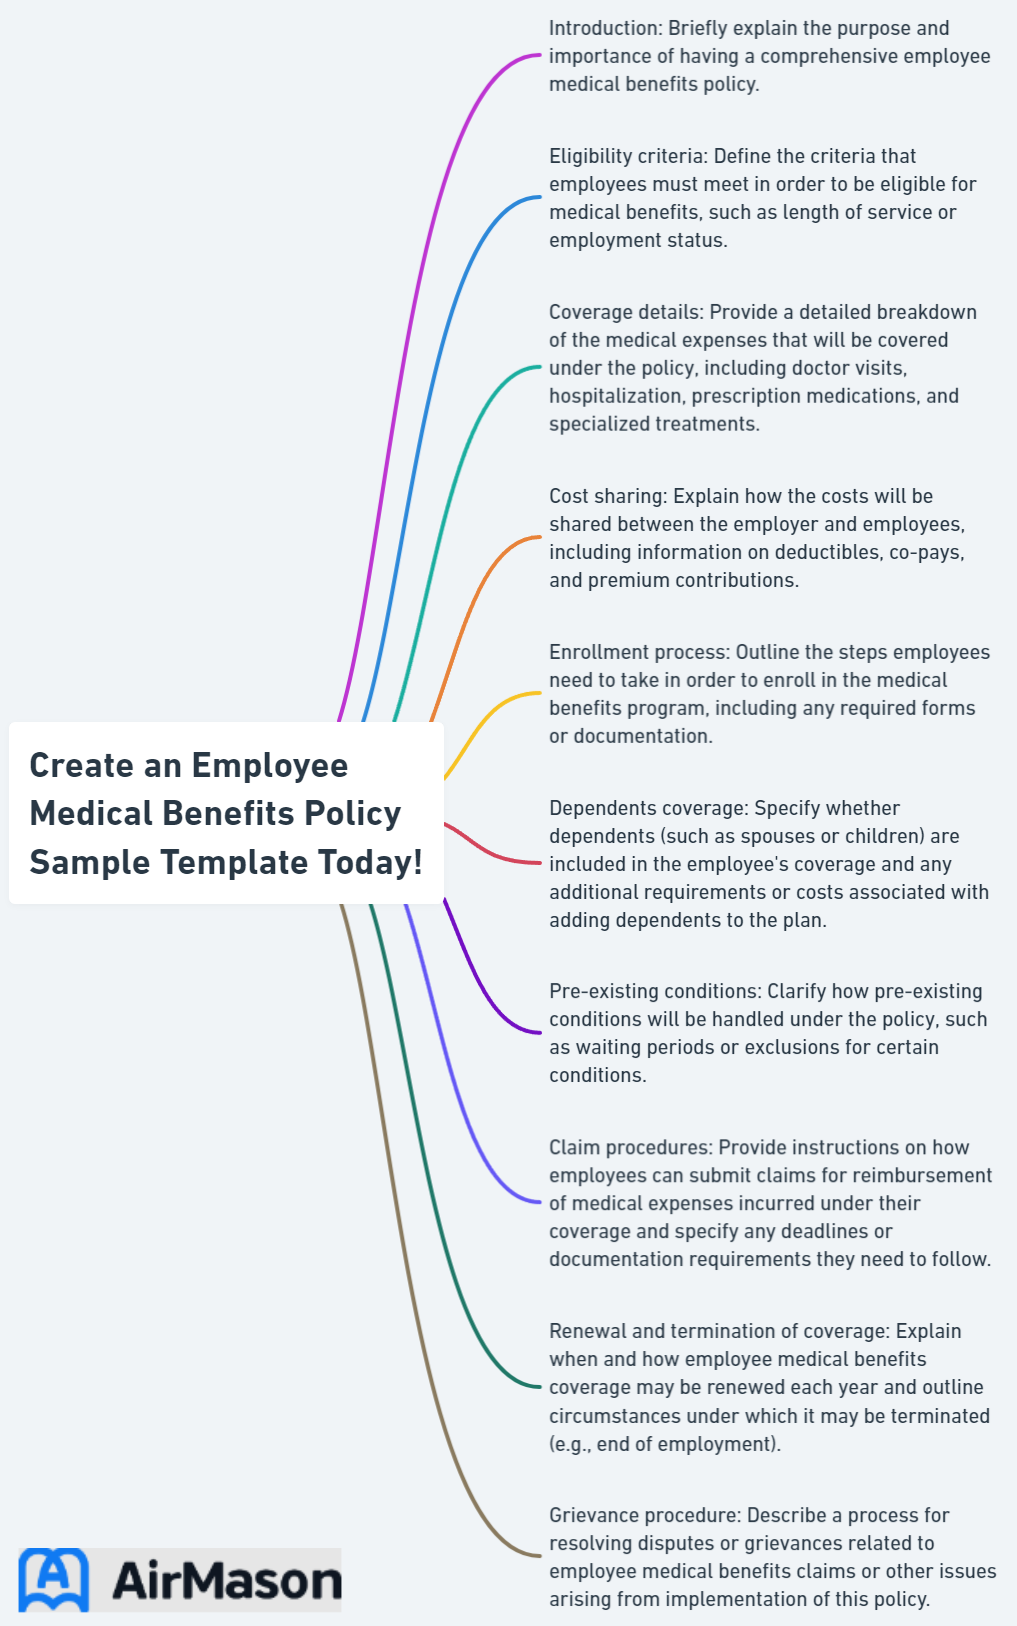 Create an Employee Medical Benefits Policy Sample Template Today!